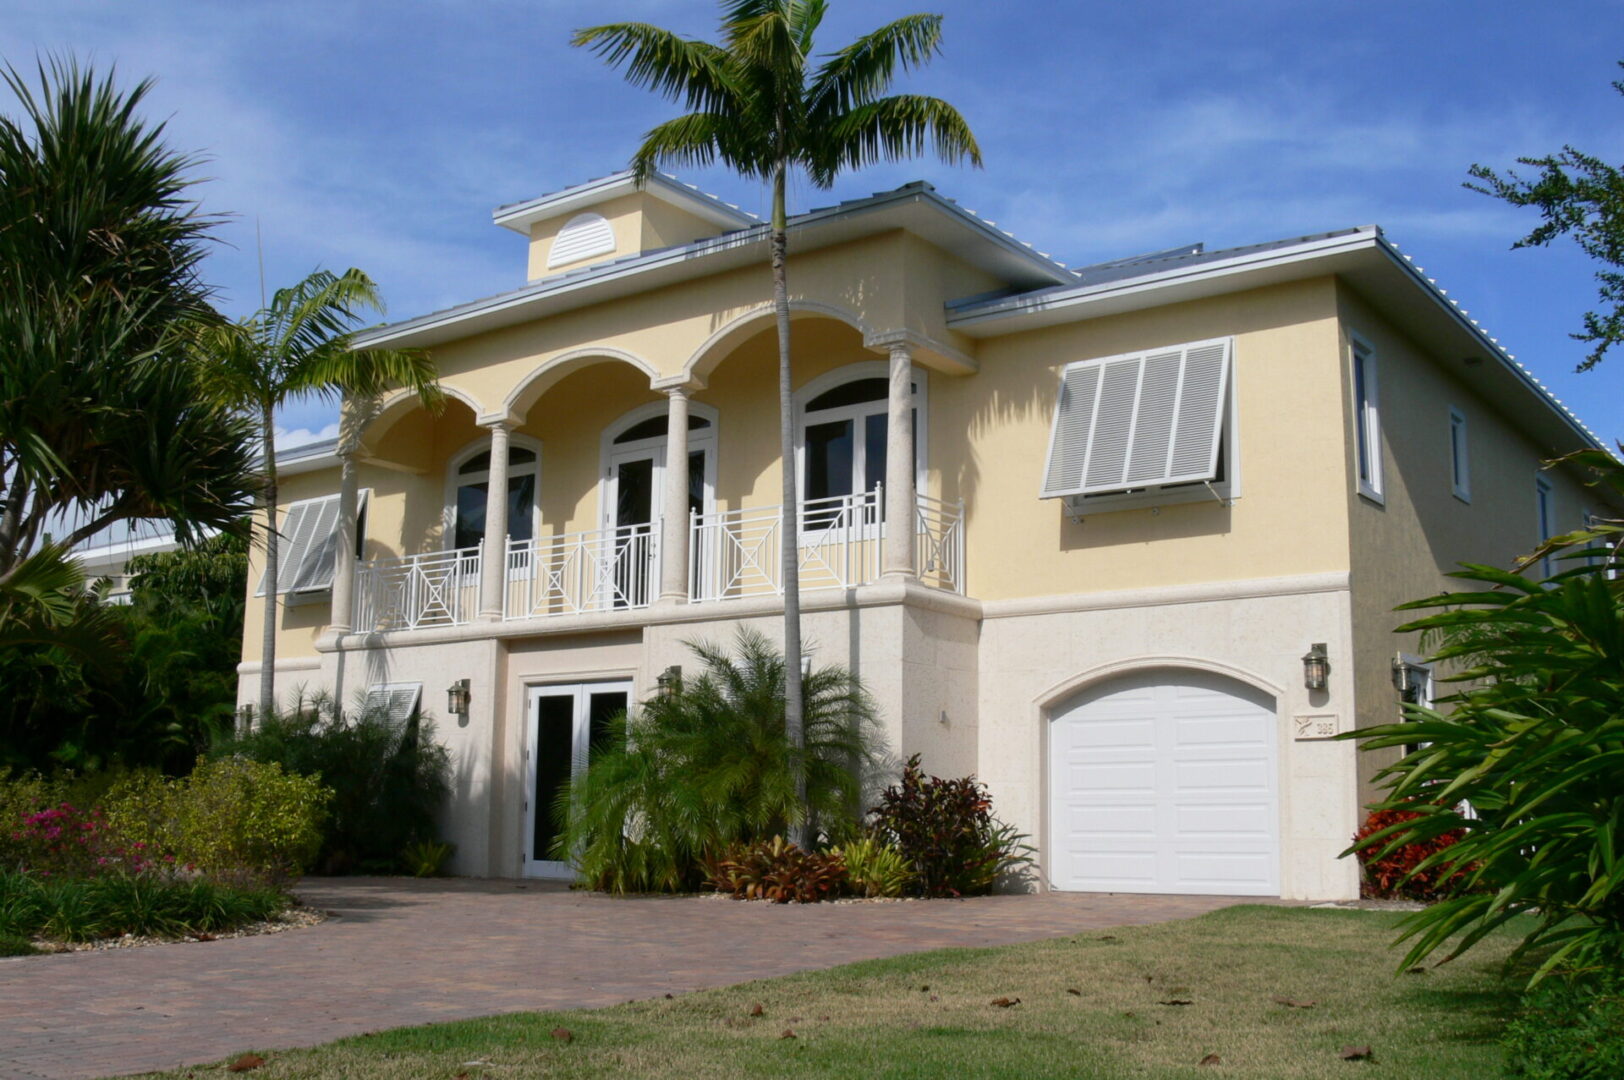 A large yellow house with palm trees in front of it.